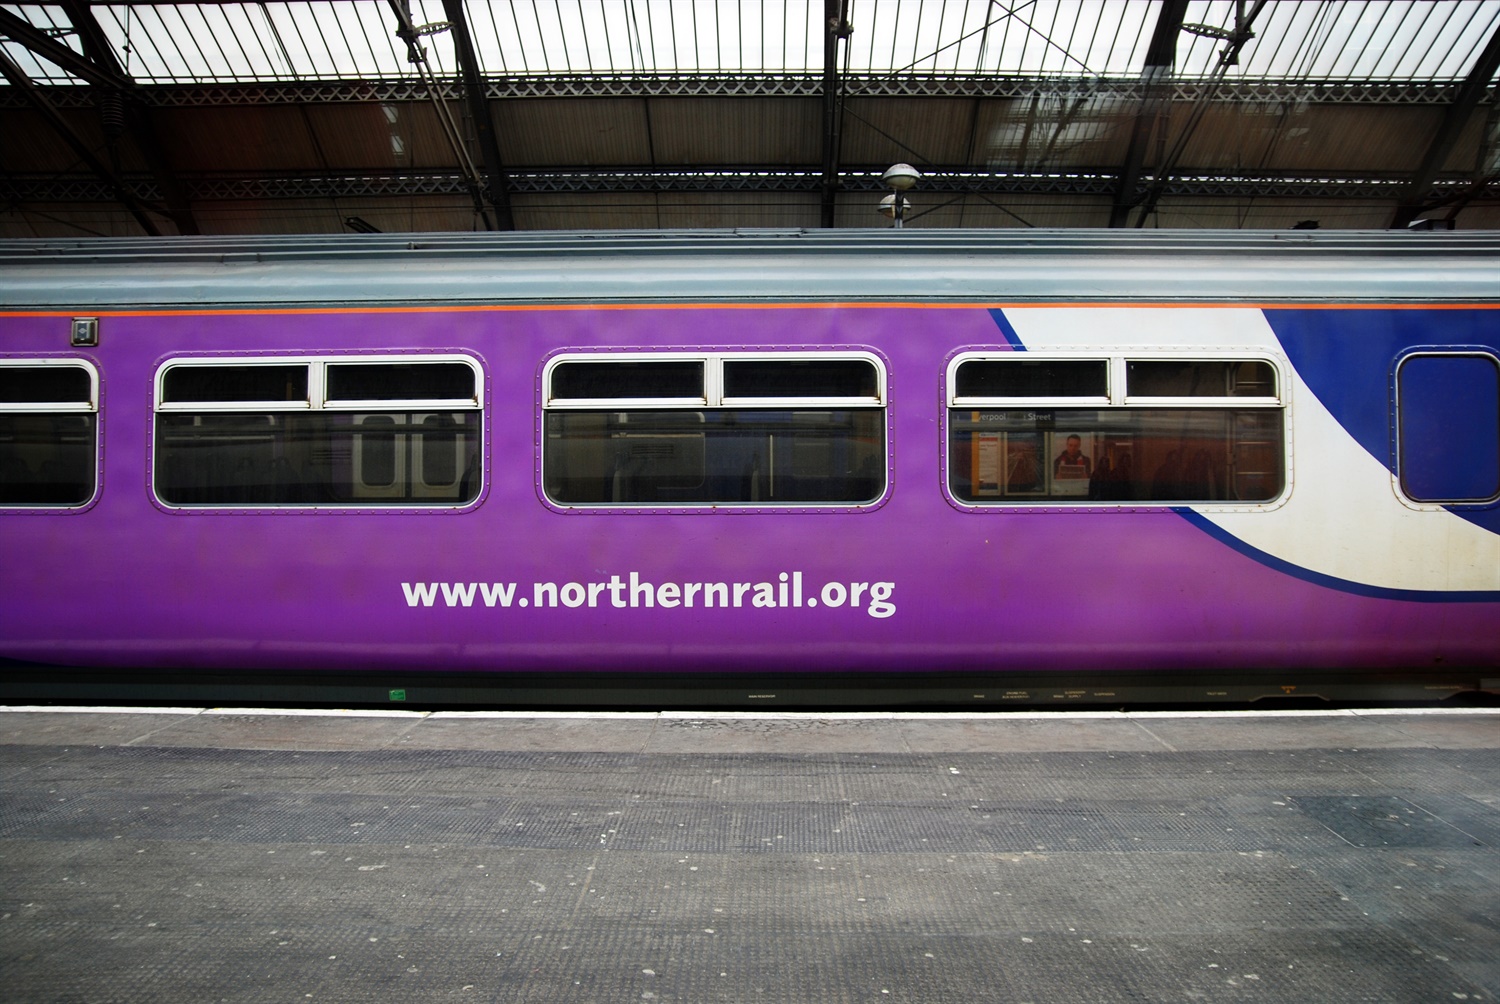 Strikes suspended as Northern and RMT reach an agreement in bitter guards dispute